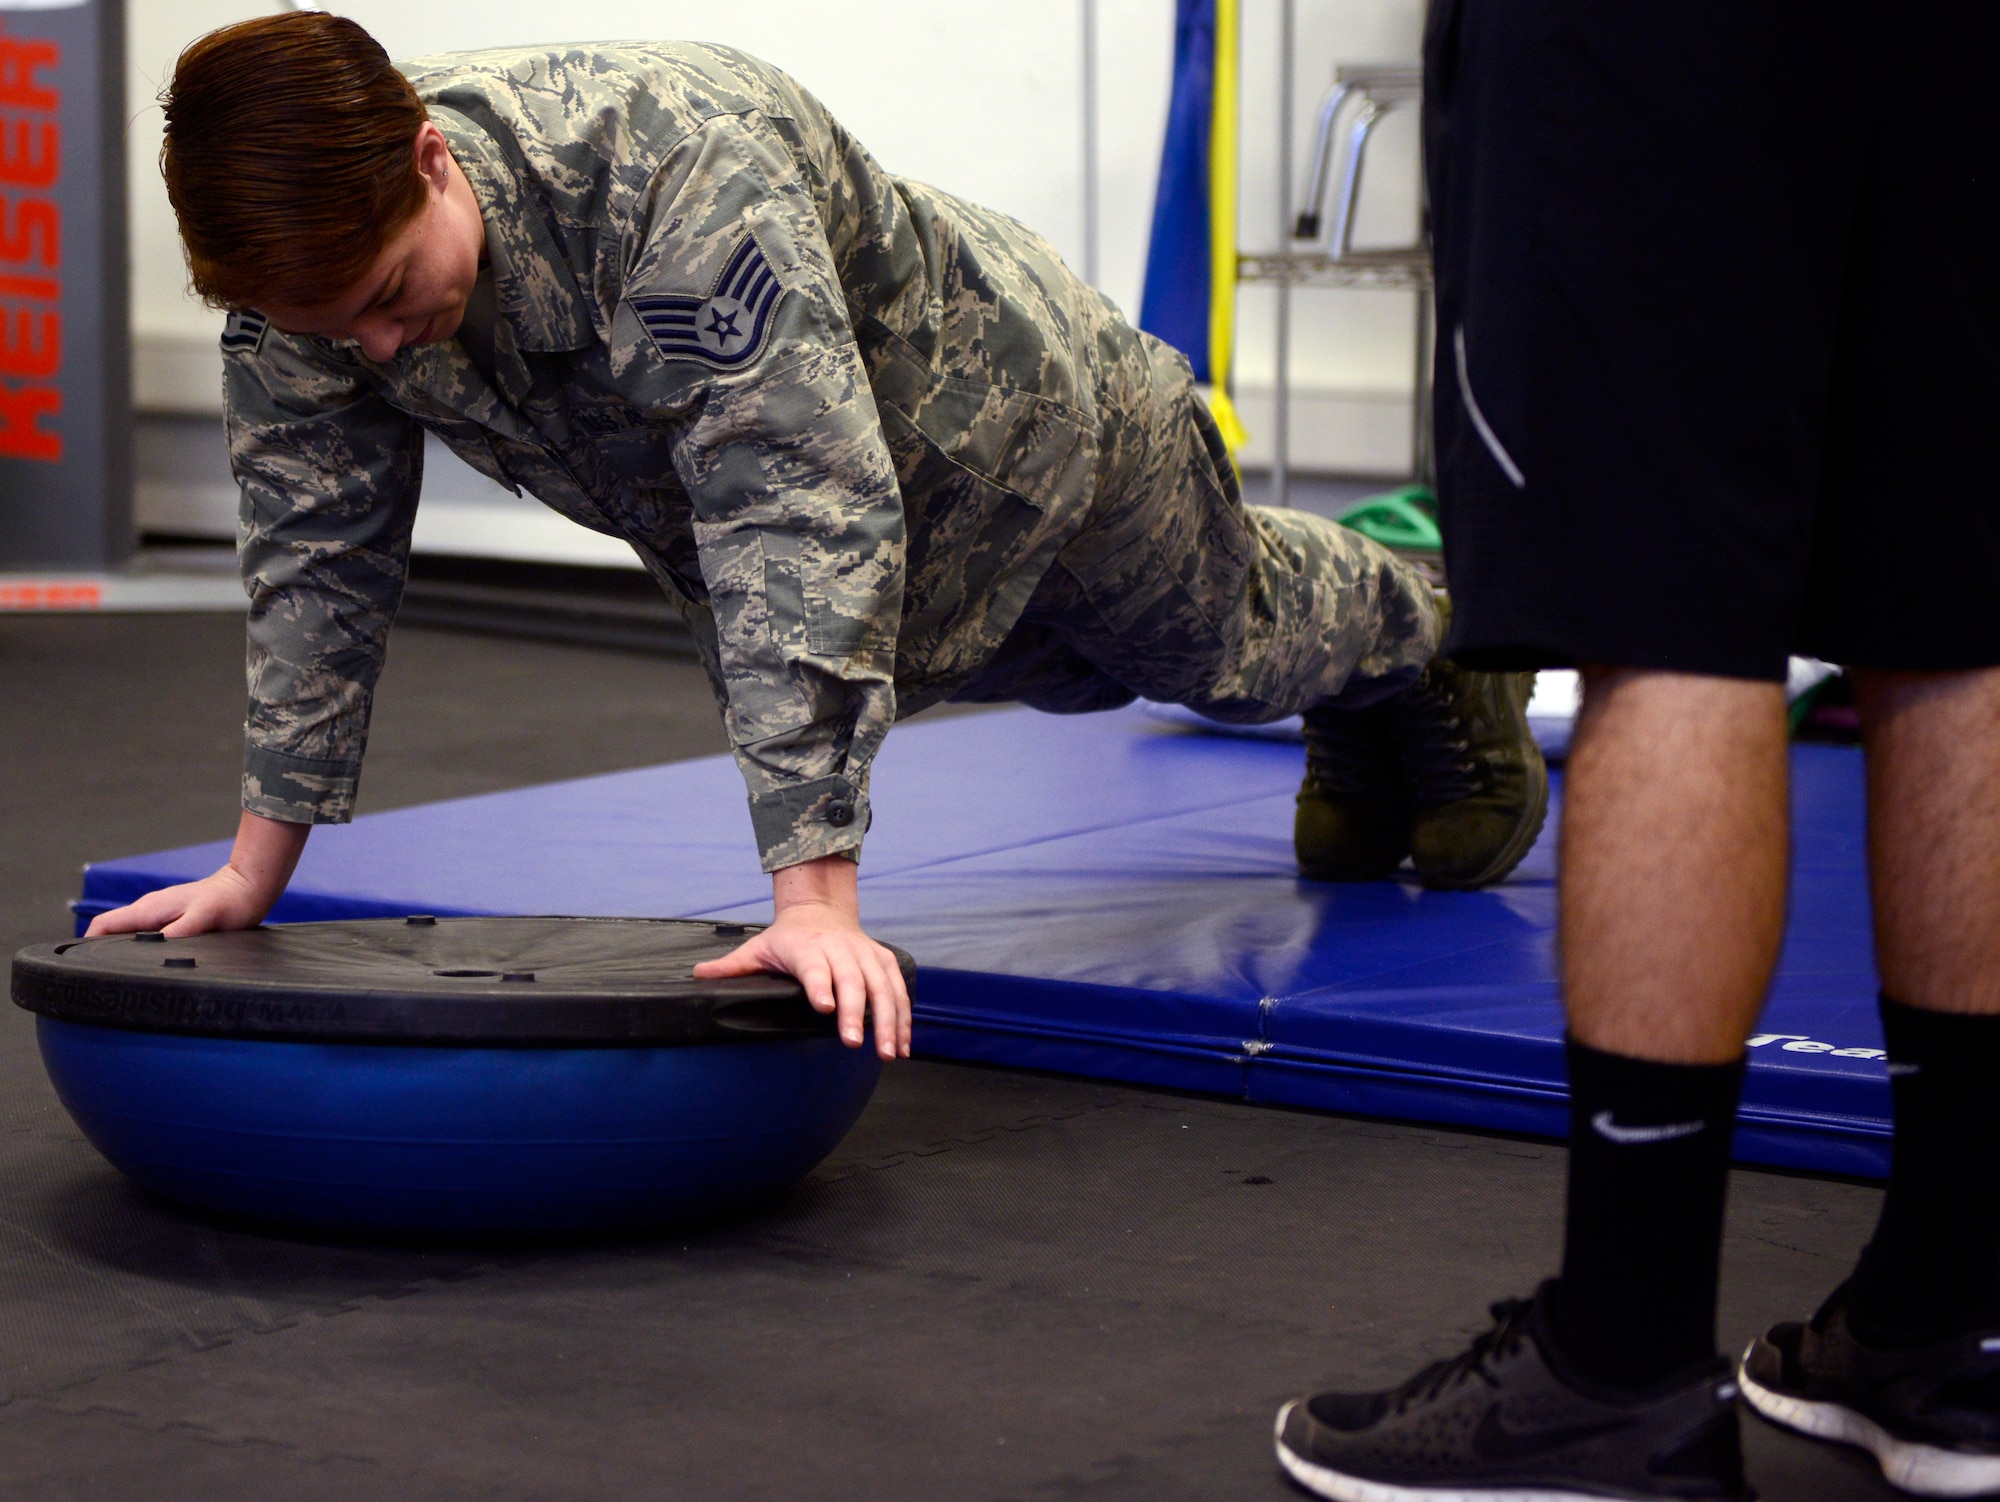 Staff Sgt. Sage Summers, 86th Medical Operations Squadron physical therapy technician, demonstrates how to properly perform a balancing exercise during his physical therapy session Feb. 3, 2016, at Ramstein Air Base, Germany. Airmen from the 86th MDOS help guide patients through series of exercise routines to get them back to health. (U.S. Air Force photo/Tech. Sgt. Kristopher Levasseur)